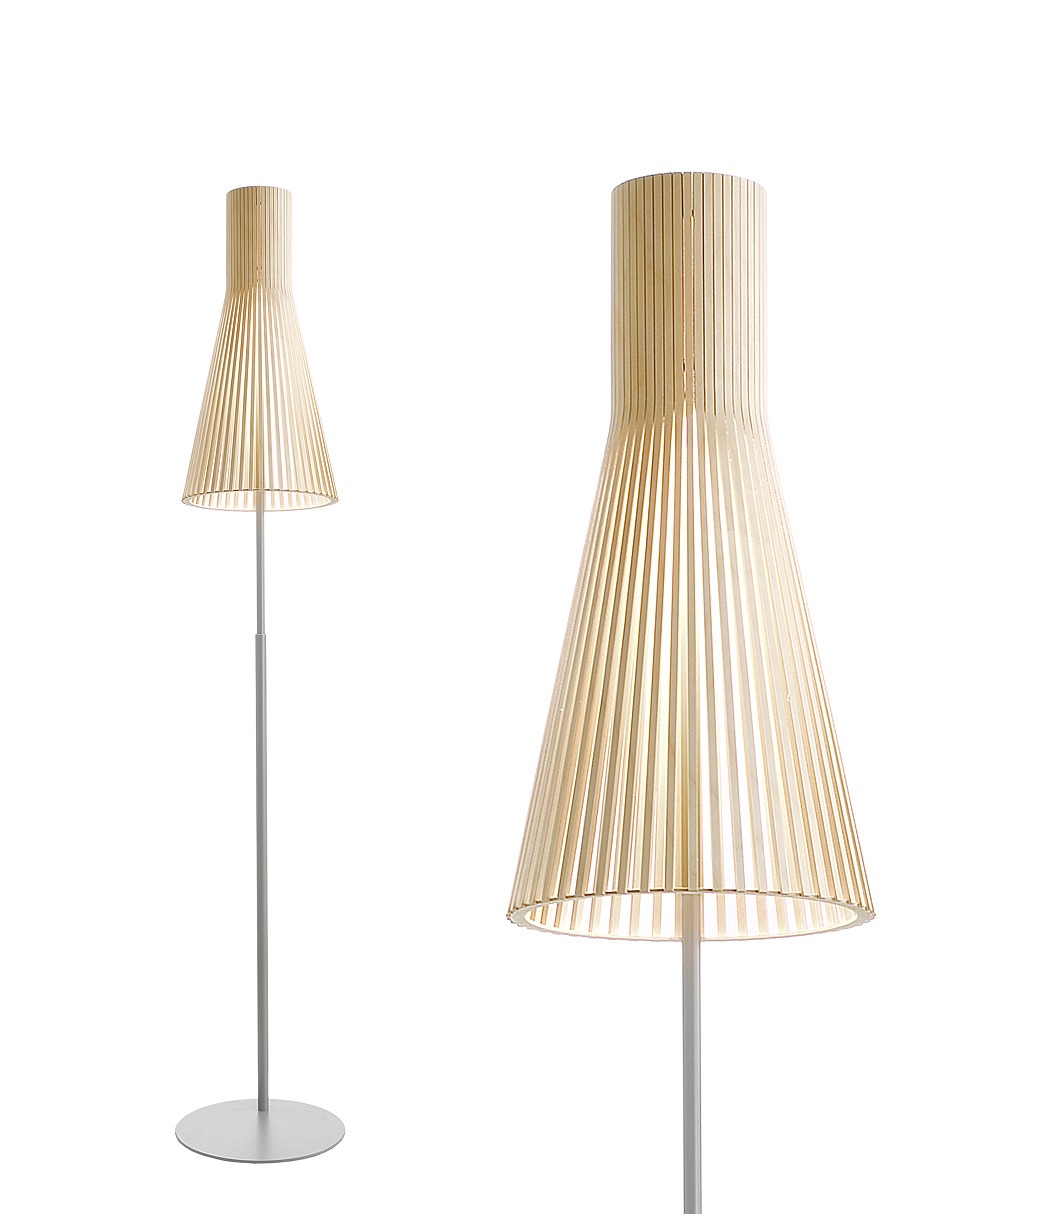 Secto 4210 floor lamp is available in natural birch